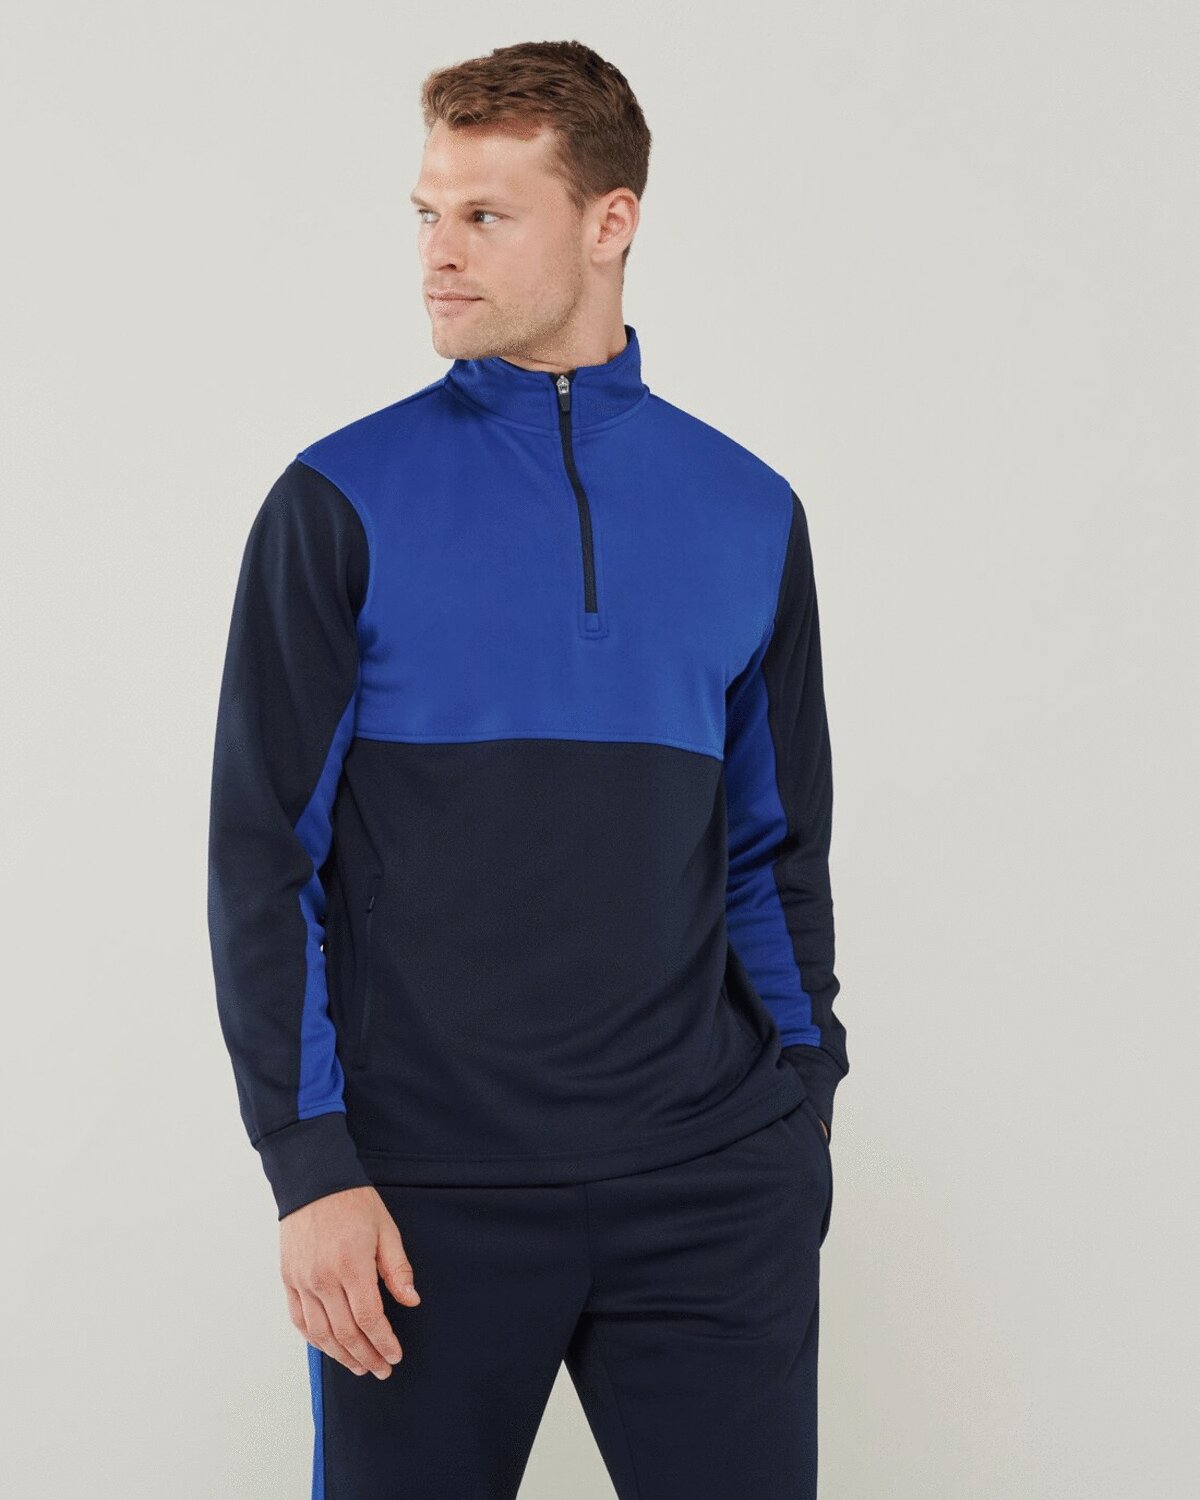 LV874M-ADULTS 1/4 ZIP TRACKSUIT TOP